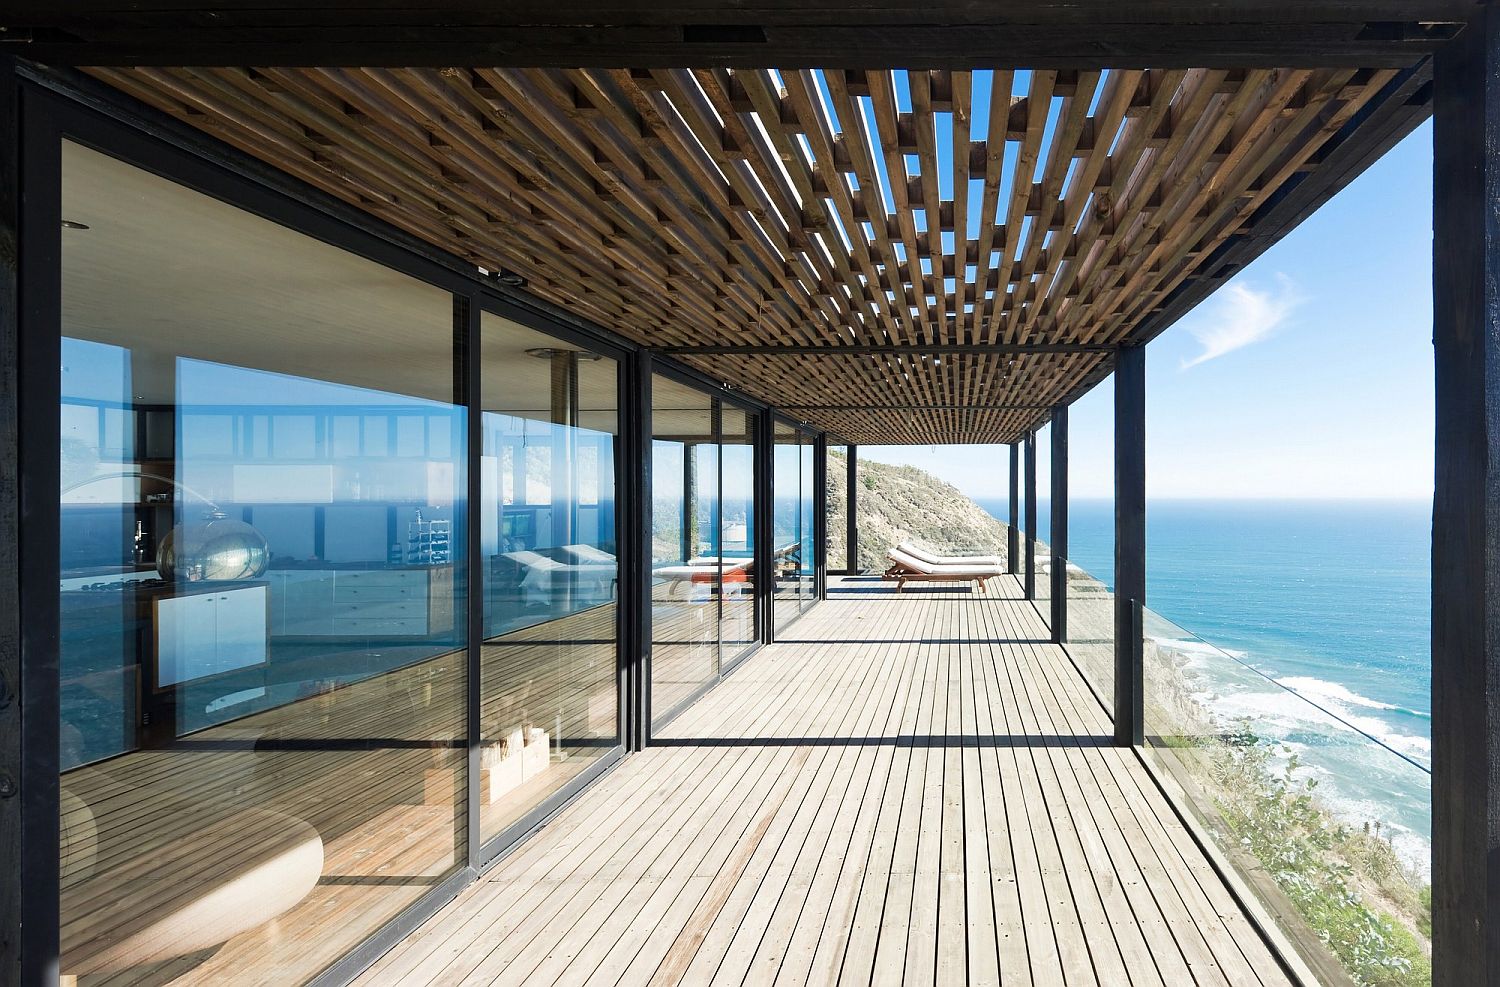 Open deck outside the house offers amazing views of the coastline